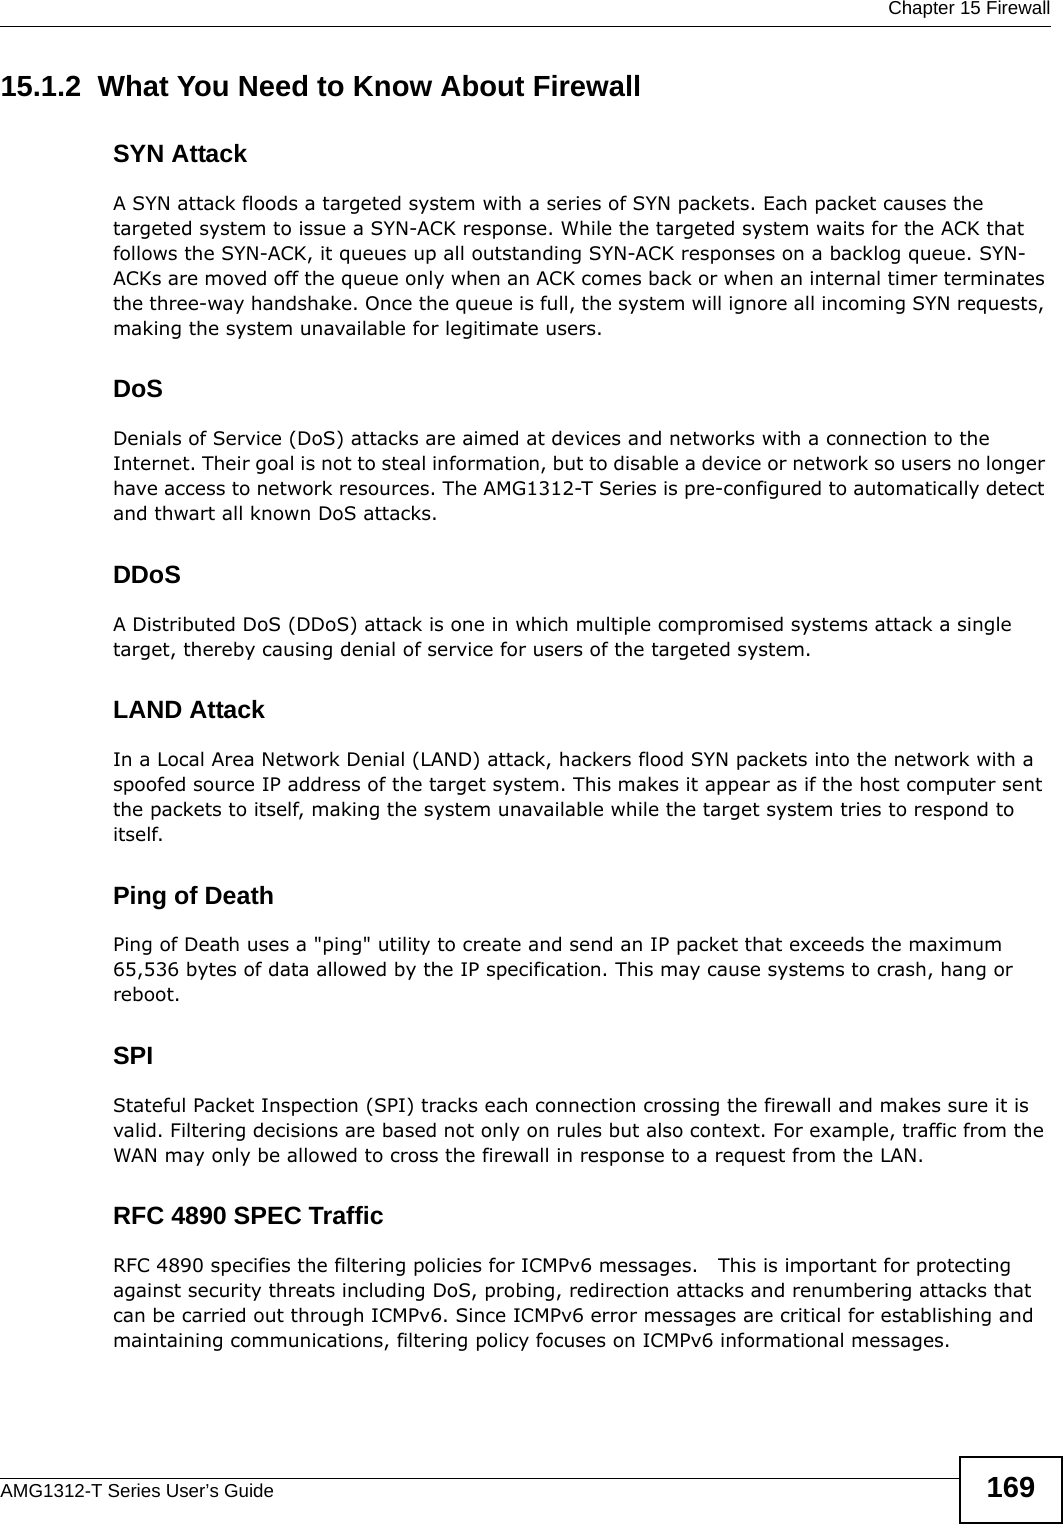  Chapter 15 FirewallAMG1312-T Series User’s Guide 16915.1.2  What You Need to Know About FirewallSYN AttackA SYN attack floods a targeted system with a series of SYN packets. Each packet causes the targeted system to issue a SYN-ACK response. While the targeted system waits for the ACK that follows the SYN-ACK, it queues up all outstanding SYN-ACK responses on a backlog queue. SYN-ACKs are moved off the queue only when an ACK comes back or when an internal timer terminates the three-way handshake. Once the queue is full, the system will ignore all incoming SYN requests, making the system unavailable for legitimate users.DoSDenials of Service (DoS) attacks are aimed at devices and networks with a connection to the Internet. Their goal is not to steal information, but to disable a device or network so users no longer have access to network resources. The AMG1312-T Series is pre-configured to automatically detect and thwart all known DoS attacks.DDoSA Distributed DoS (DDoS) attack is one in which multiple compromised systems attack a single target, thereby causing denial of service for users of the targeted system.LAND AttackIn a Local Area Network Denial (LAND) attack, hackers flood SYN packets into the network with a spoofed source IP address of the target system. This makes it appear as if the host computer sent the packets to itself, making the system unavailable while the target system tries to respond to itself.Ping of DeathPing of Death uses a &quot;ping&quot; utility to create and send an IP packet that exceeds the maximum 65,536 bytes of data allowed by the IP specification. This may cause systems to crash, hang or reboot.SPIStateful Packet Inspection (SPI) tracks each connection crossing the firewall and makes sure it is valid. Filtering decisions are based not only on rules but also context. For example, traffic from the WAN may only be allowed to cross the firewall in response to a request from the LAN.RFC 4890 SPEC TrafficRFC 4890 specifies the filtering policies for ICMPv6 messages.   This is important for protecting against security threats including DoS, probing, redirection attacks and renumbering attacks that can be carried out through ICMPv6. Since ICMPv6 error messages are critical for establishing and maintaining communications, filtering policy focuses on ICMPv6 informational messages.